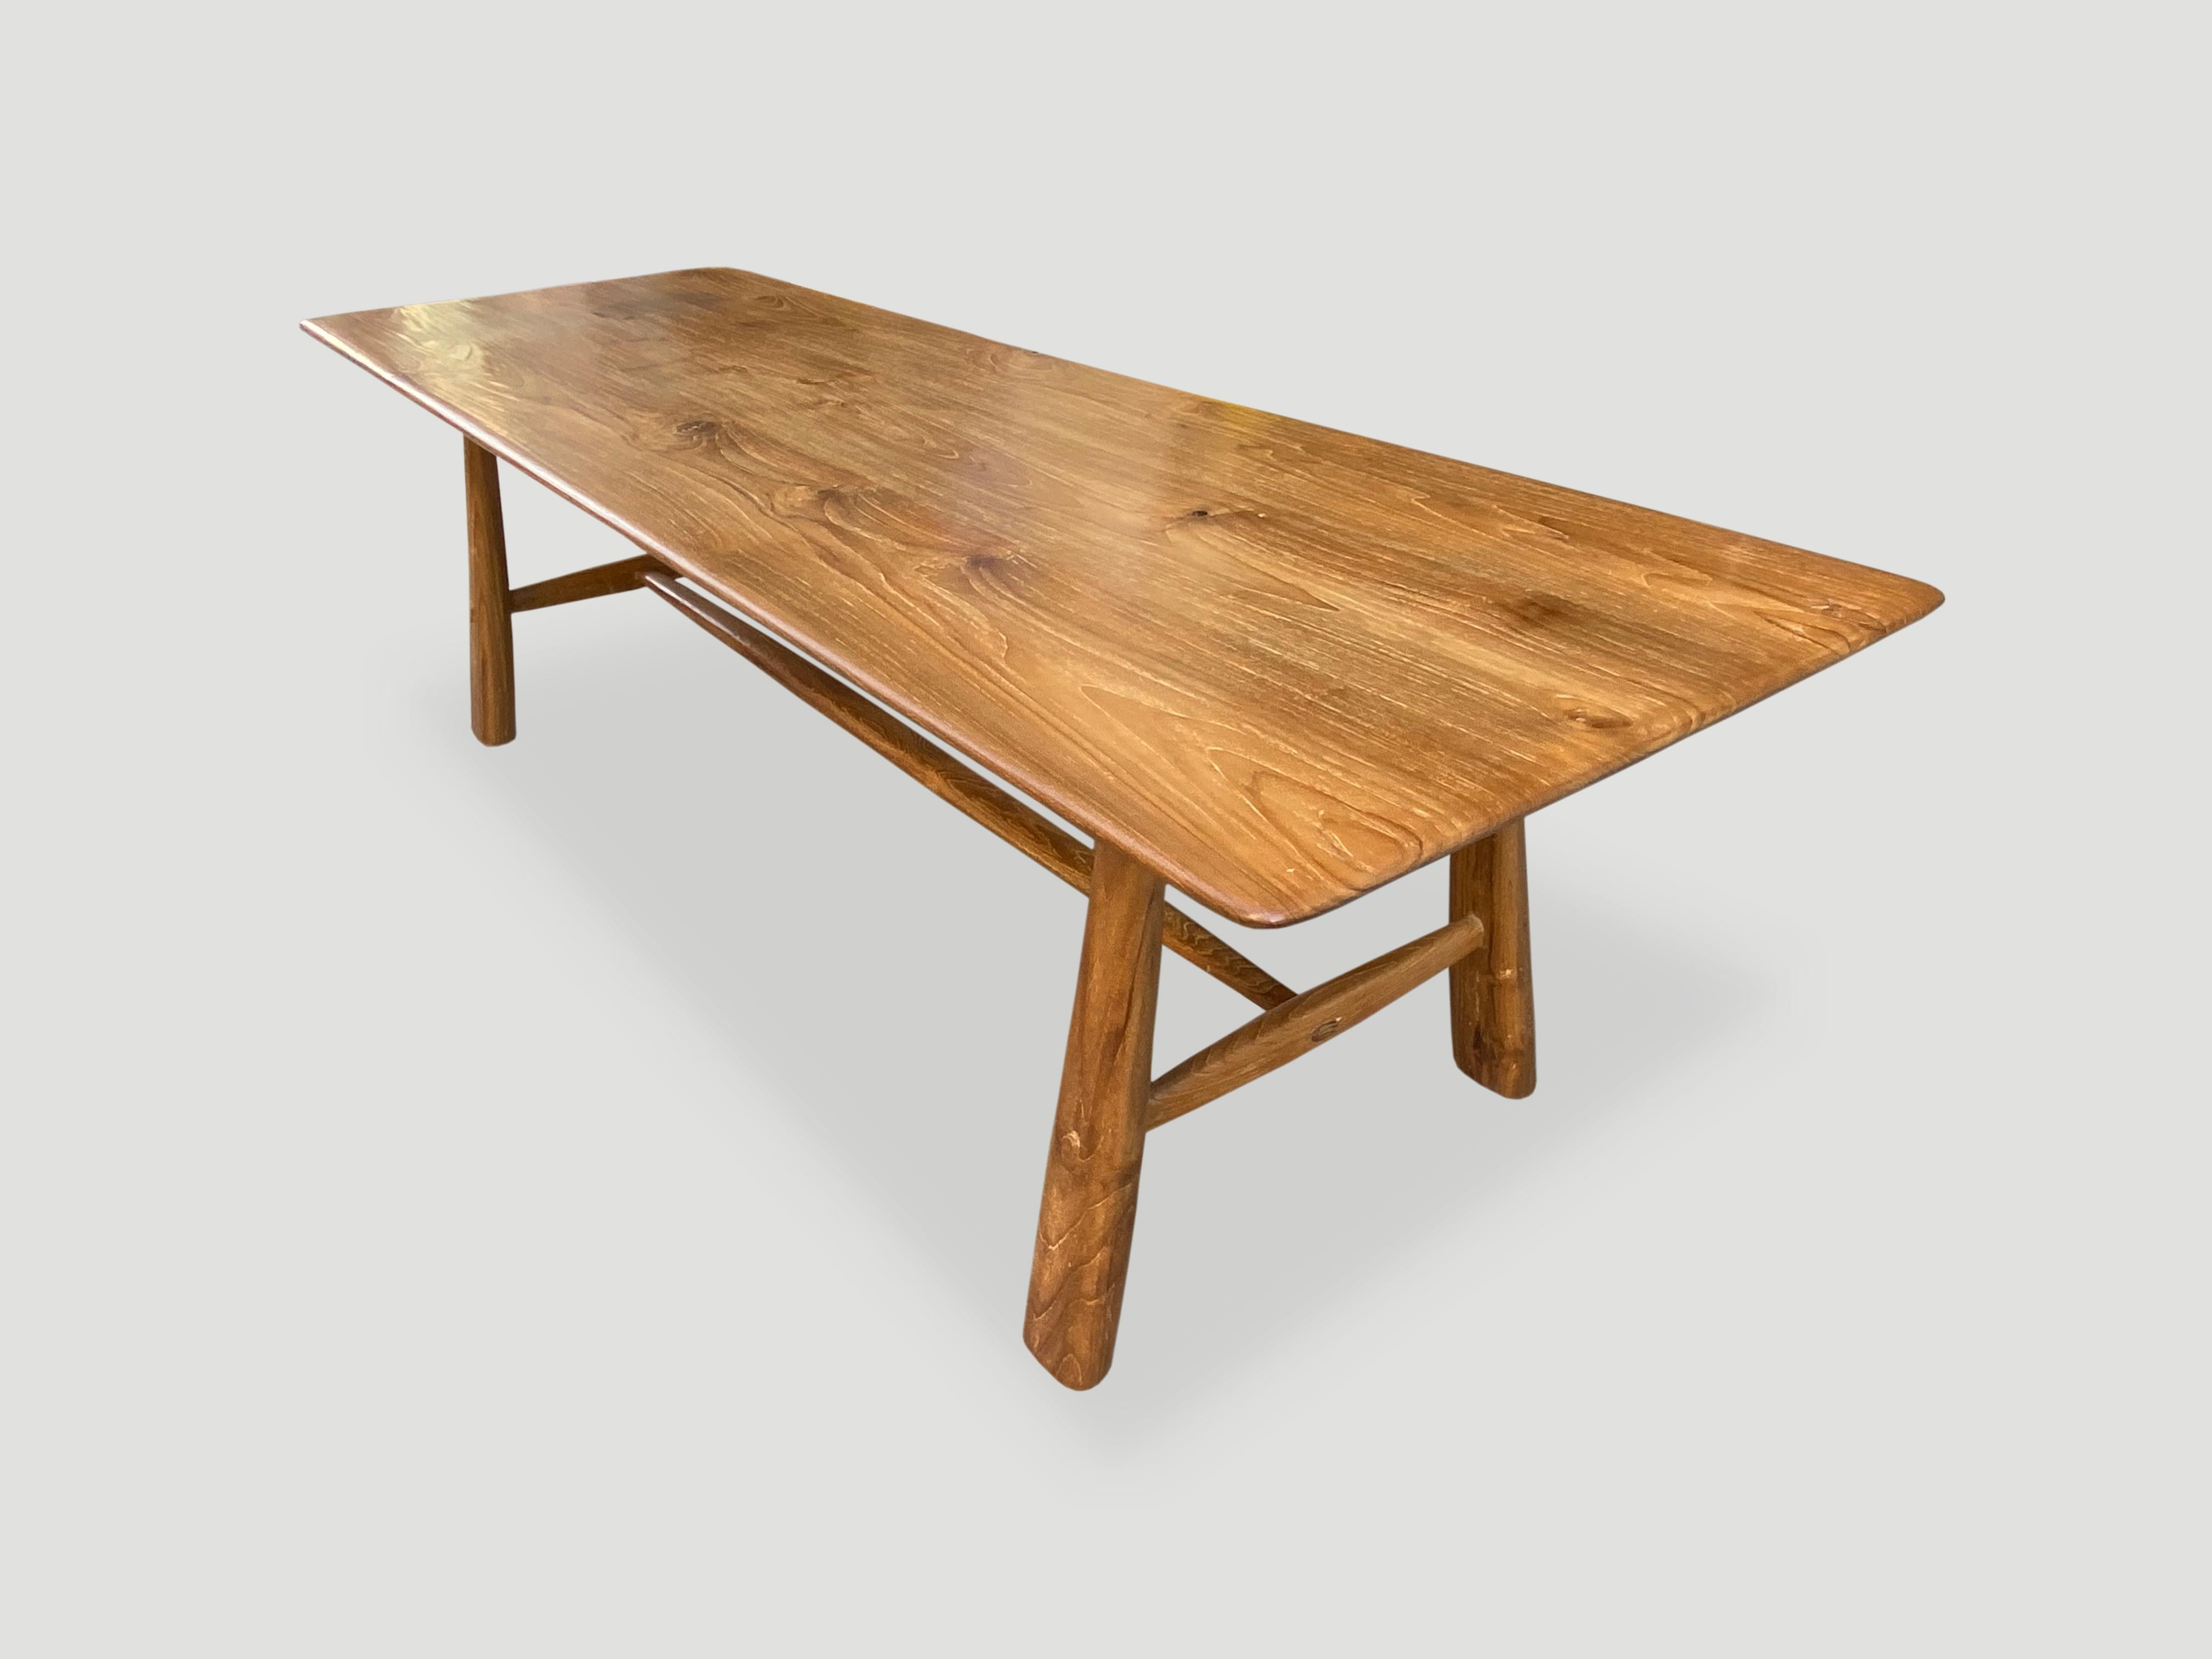 Andrianna Shamaris Midcentury Couture Teak Wood Dining Table In Excellent Condition For Sale In New York, NY